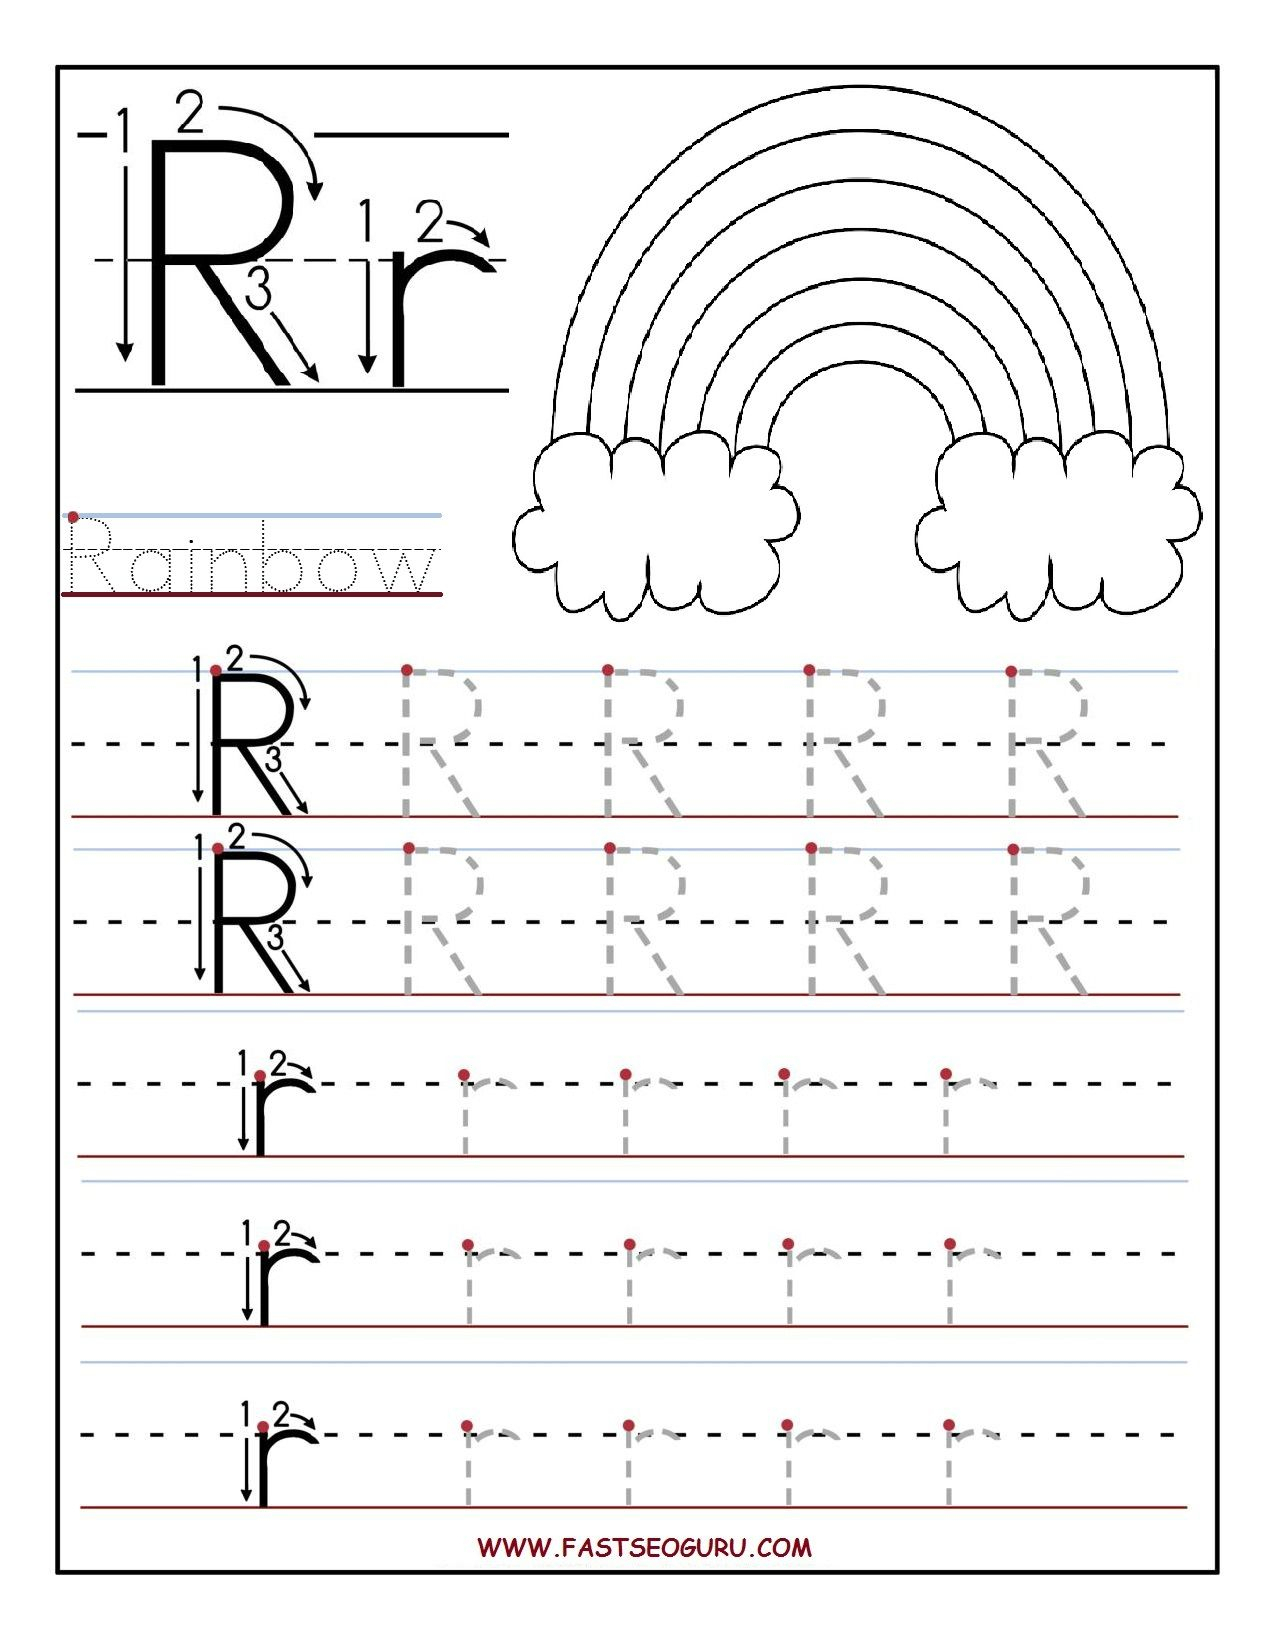 Printable Letter R Tracing Worksheets For Preschool | Letter for Letter P Tracing Sheet